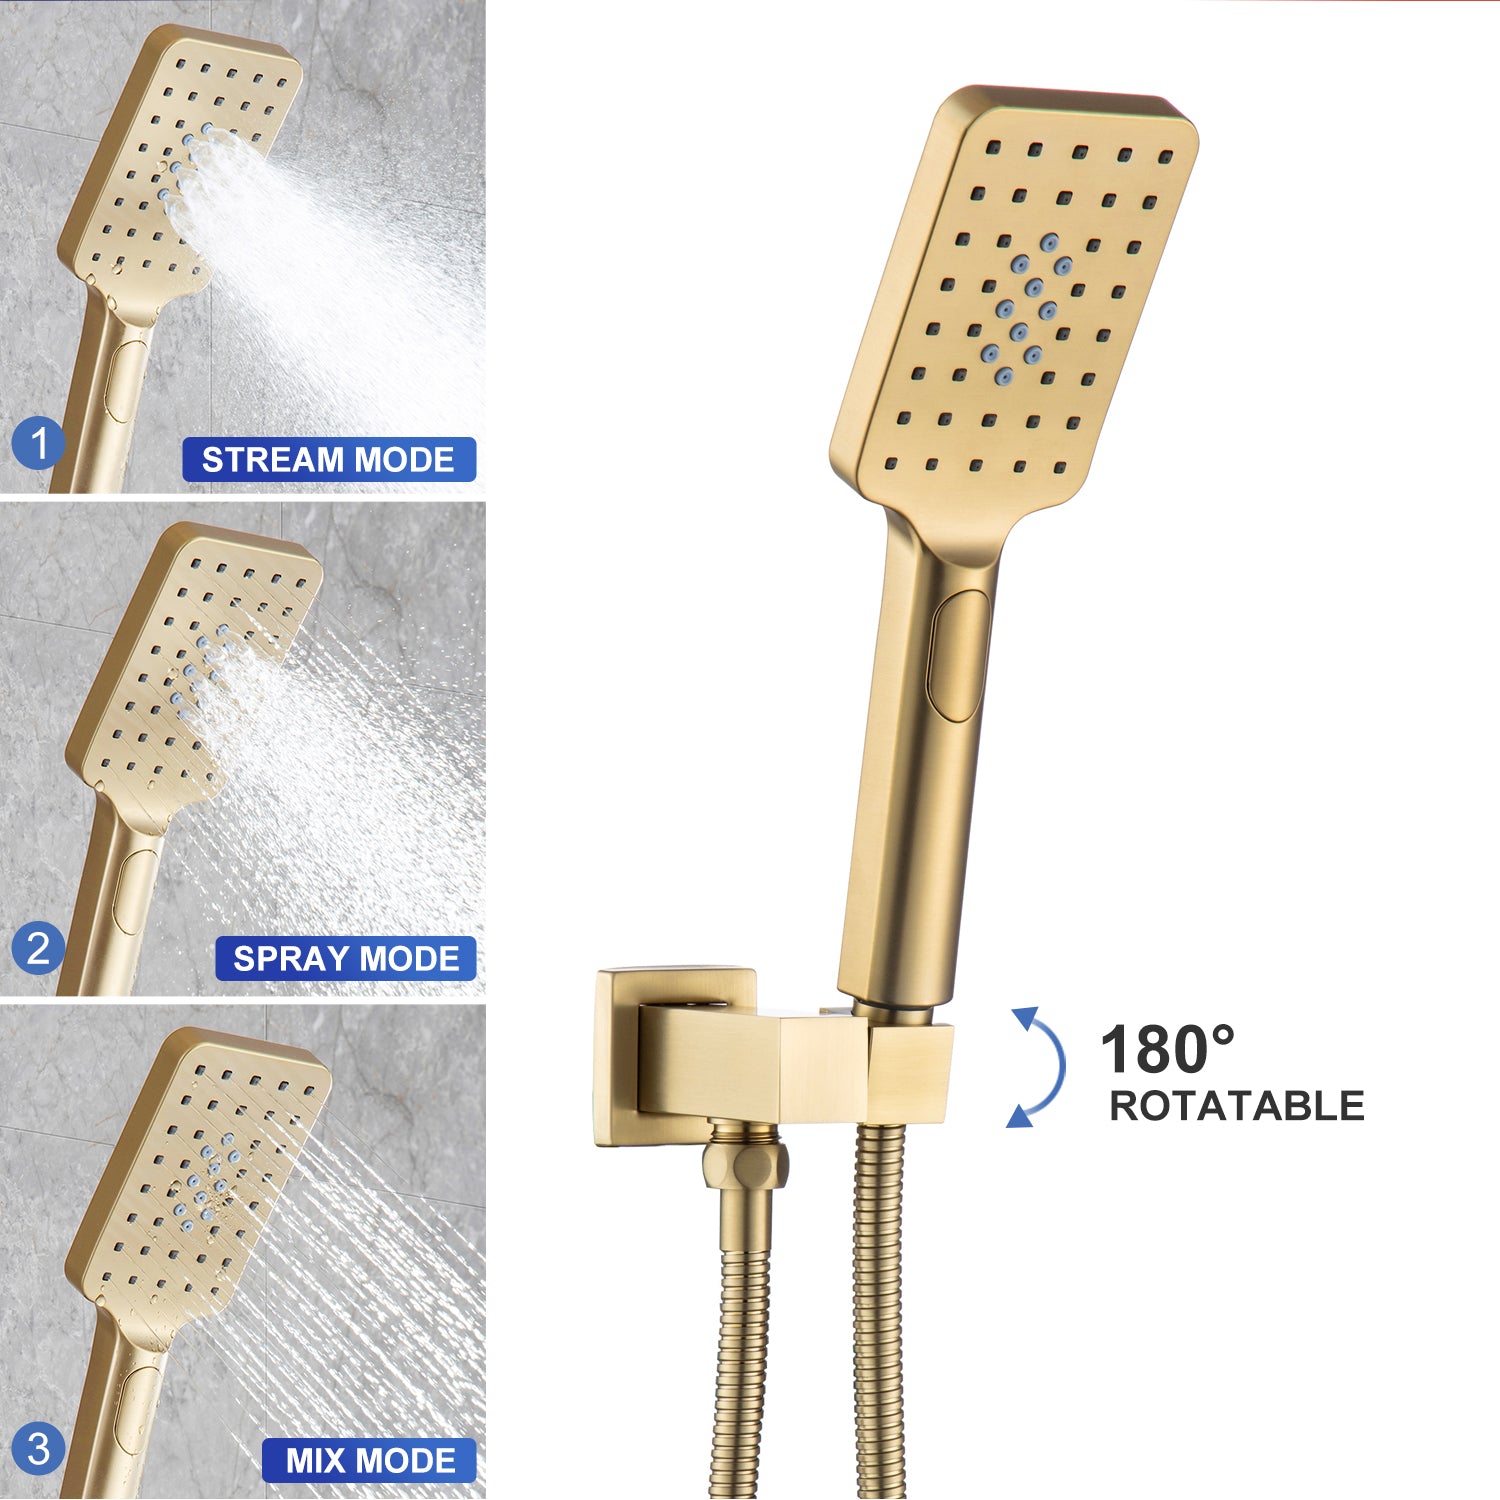 10" Shower Head 2-way Ceiling-Mount Square Shower Faucet with Rough-in Valve RX98105-10